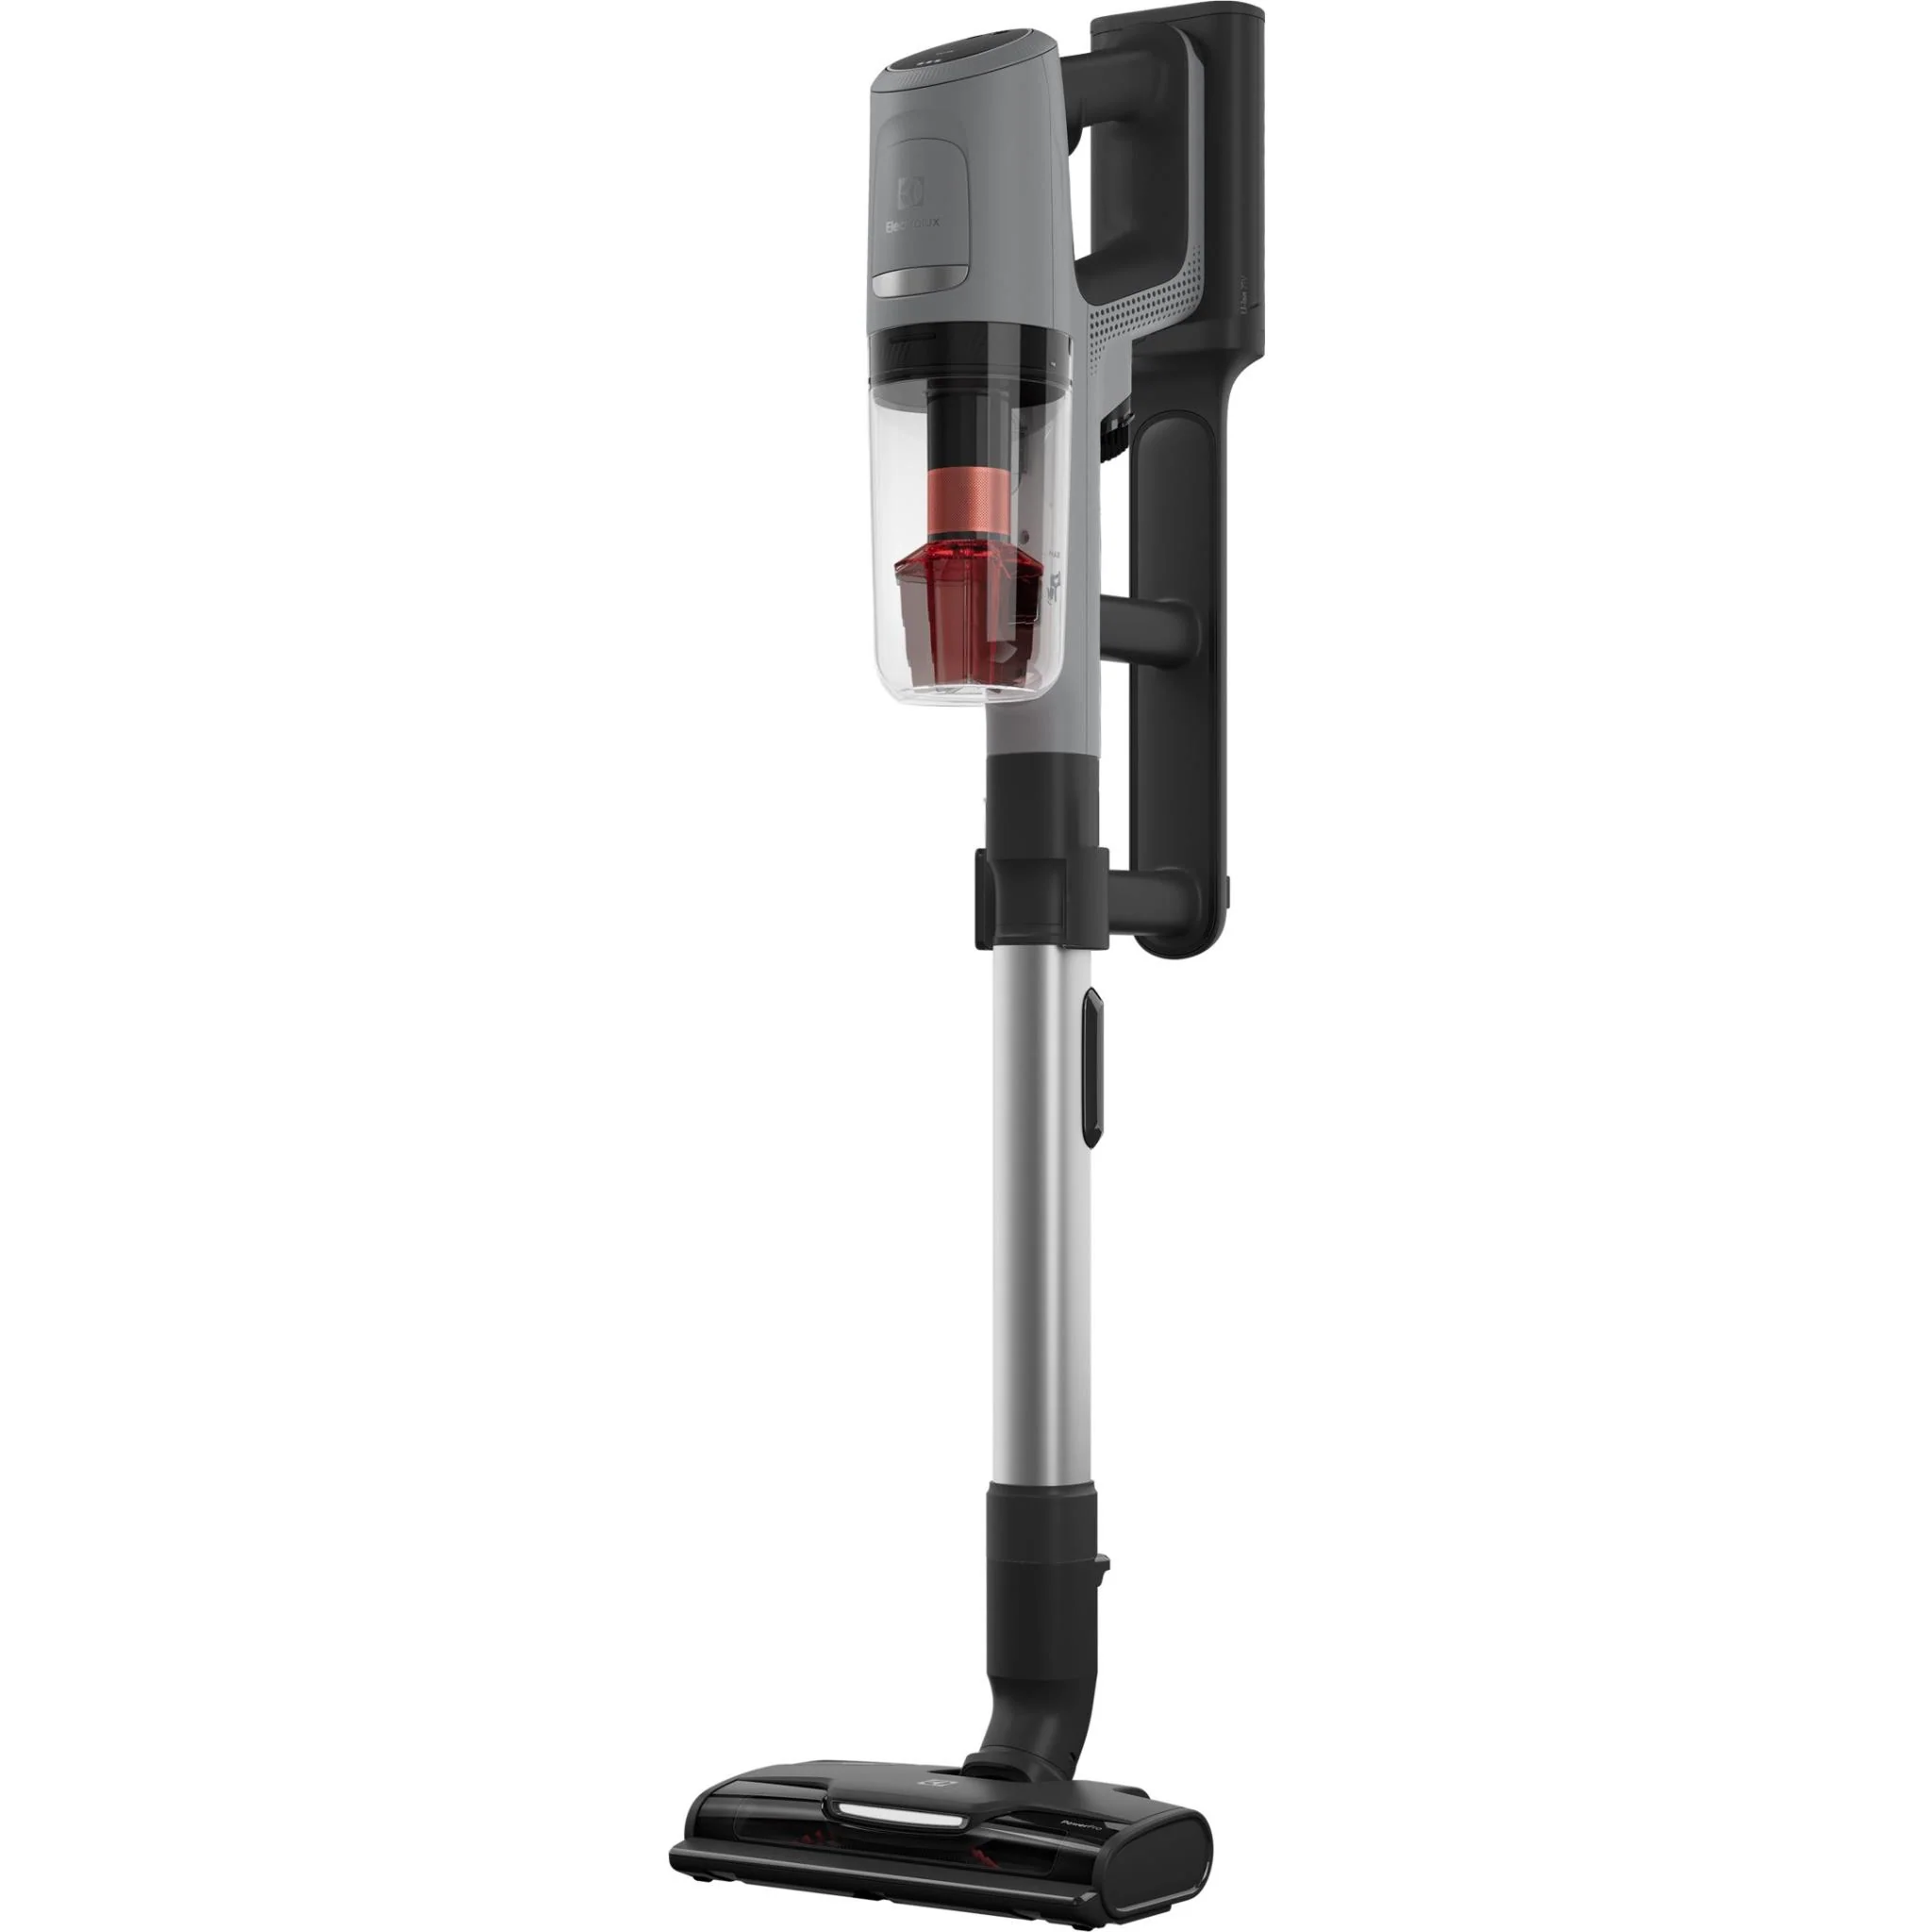 Electrolux UltimateHome 900 150AW Pet Stick Vacuum